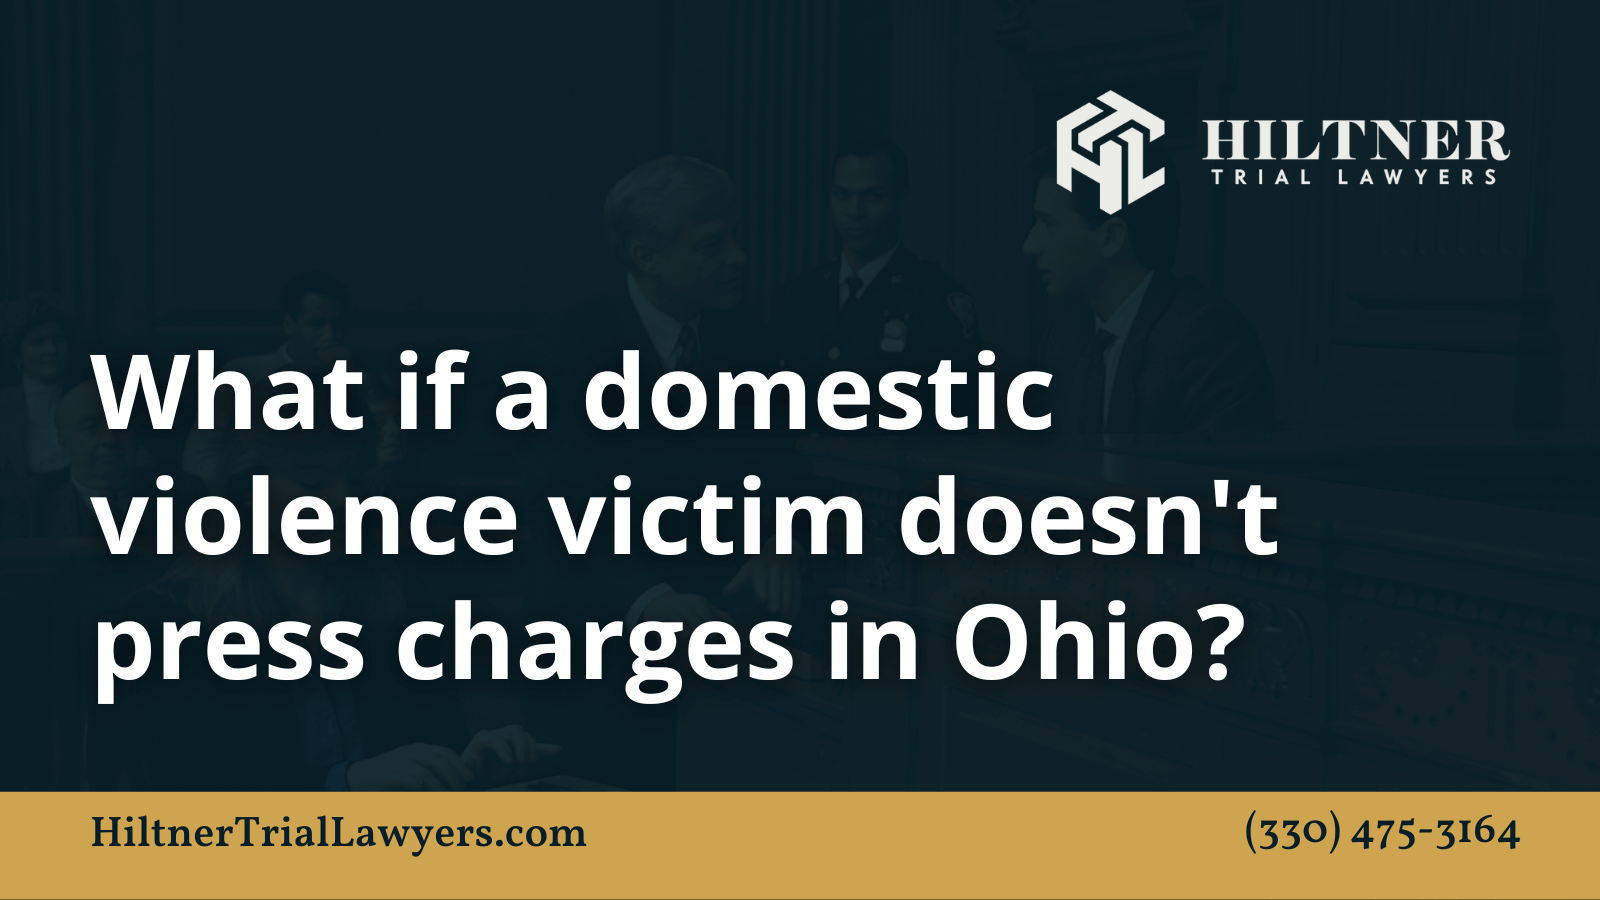 What if a domestic violence victim doesn't press charges in Ohio - Hiltner Trial Lawyers Ohio - max hiltner